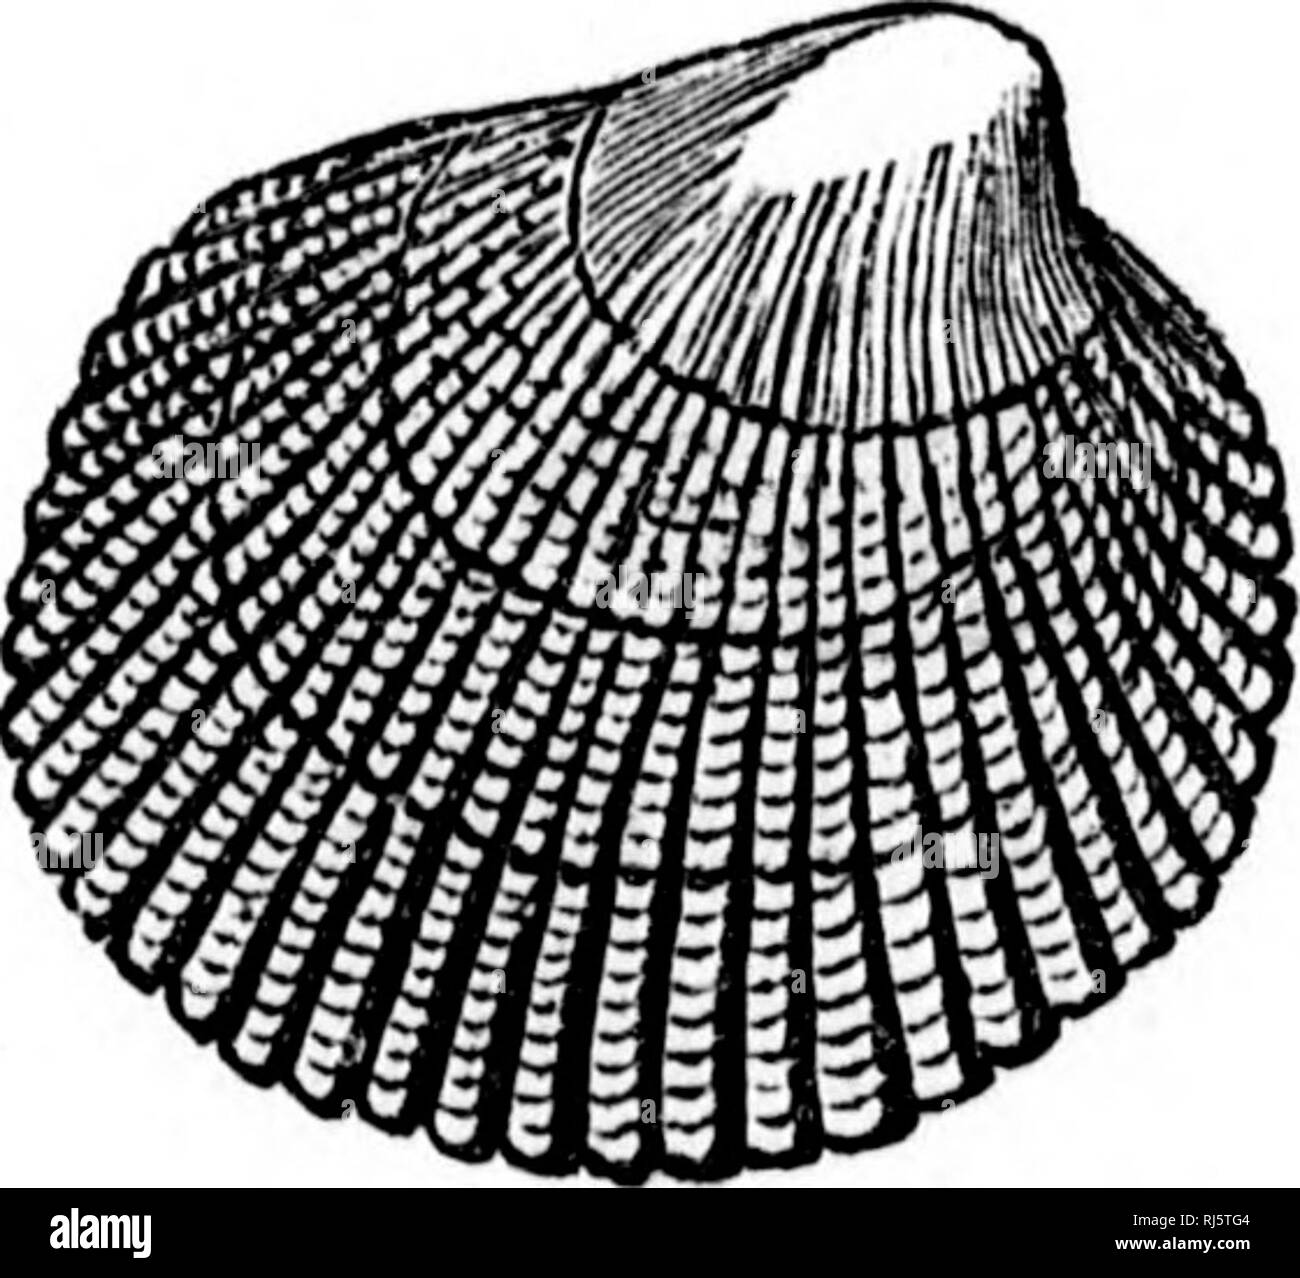 . Handbook of zoology [microform] : with examples from Canadian species, recent and fossil :. Zoology; Invertebrates; Zoologie; Invertébrés. M' I 136 niOVINCE MOLLUSCA. l.iiciiii&lt;lac—ex. Lucina, Corbis, Kellia.—Shell orbicular, closed, interior dull, obliquely furrowed. Thyadra Goiddii, a pretty little rounded shell with a flexure on the margin, is our most common species. Cardiaclac—ex Cardium, Serripes.—Shell regular, equivalve, cordate, with radiating ribs, and peculiar sculpture on posterior side. Two caidinal and two lateral teeth in each valve. Cardium Islandicum is the common cockle  Stock Photo